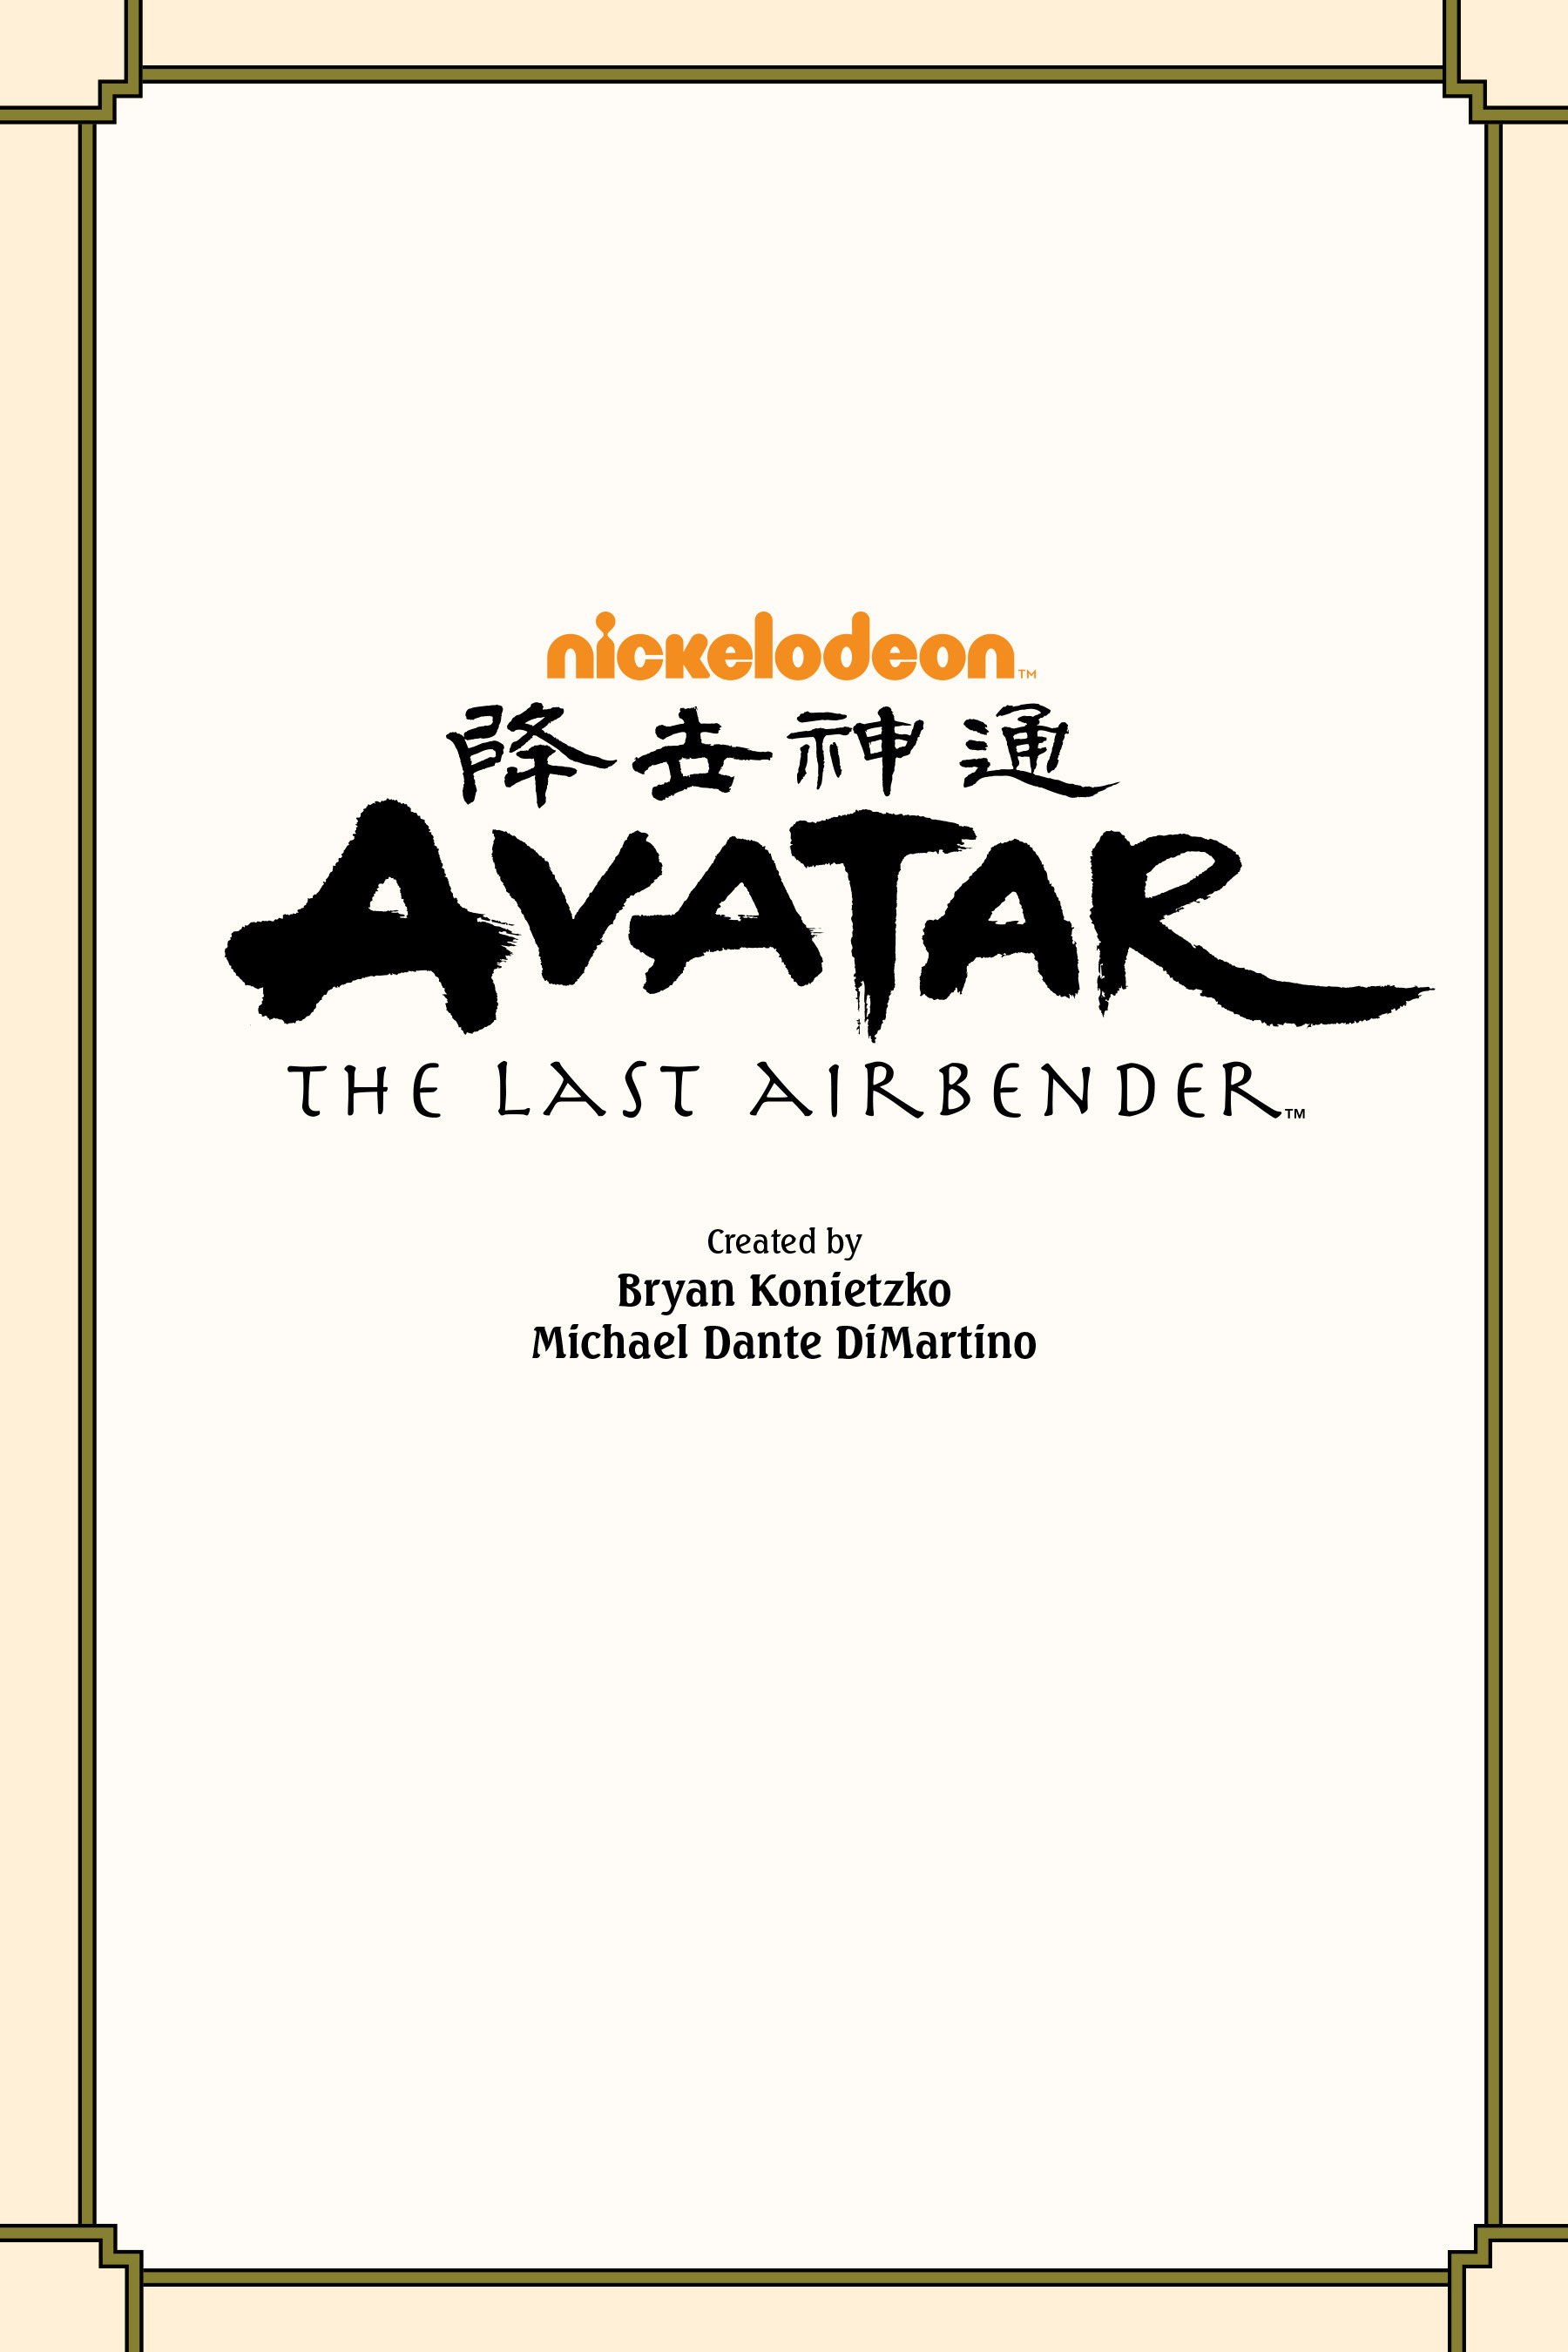 Read online Nickelodeon Avatar: The Last Airbender - Smoke and Shadow comic -  Issue # Part 2 - 3